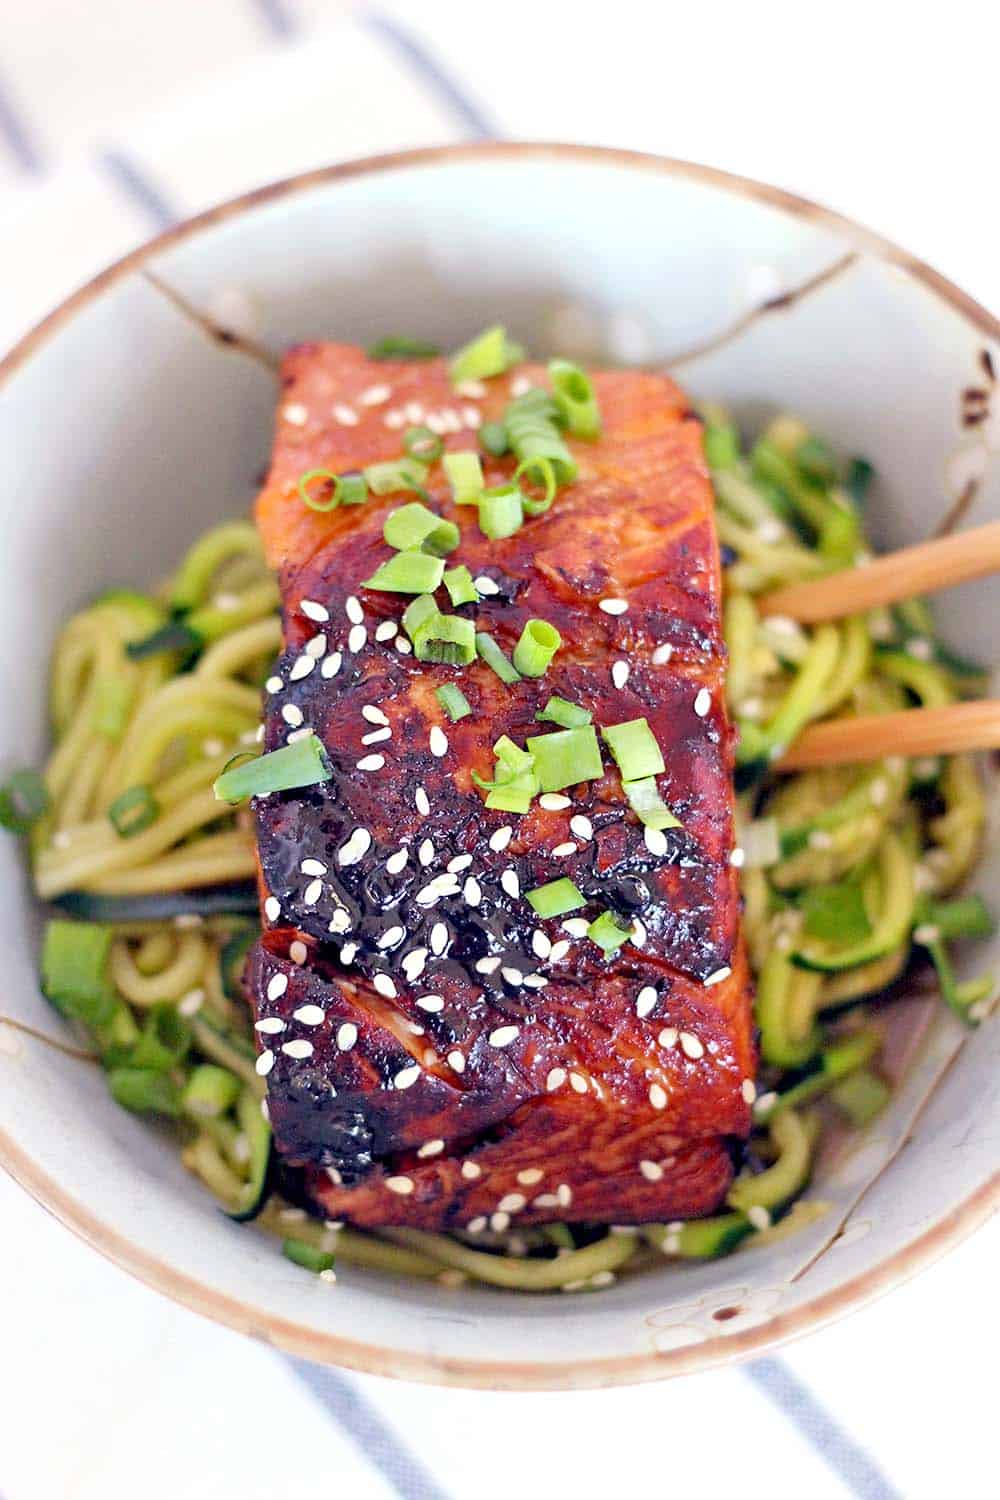 This healthy, low carb Teriyaki Salmon and Zucchini Noodle Bowl takes a mere FIFTEEN MINUTES to make and is bursting with that awesome Asian flavor you crave.